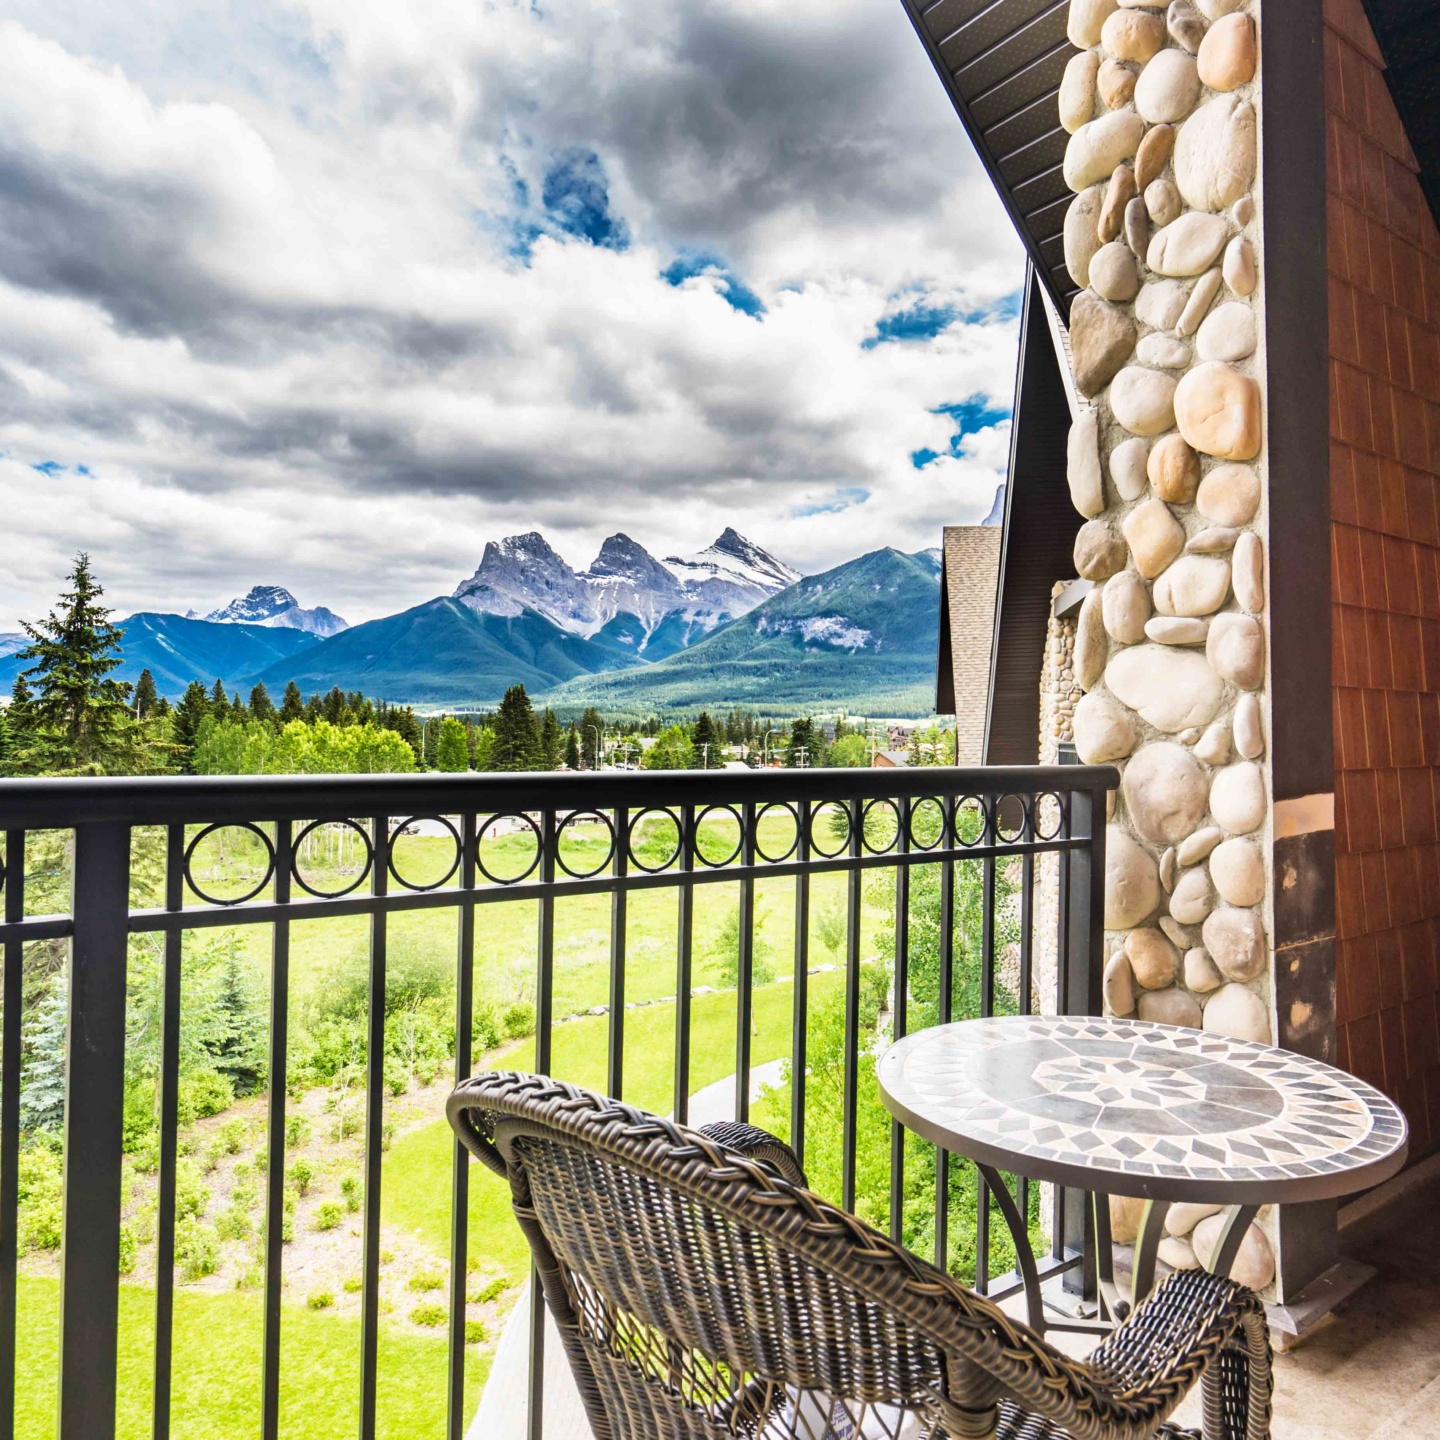 Airbnb Review: Canmore Penthouse with a View of the Rockies